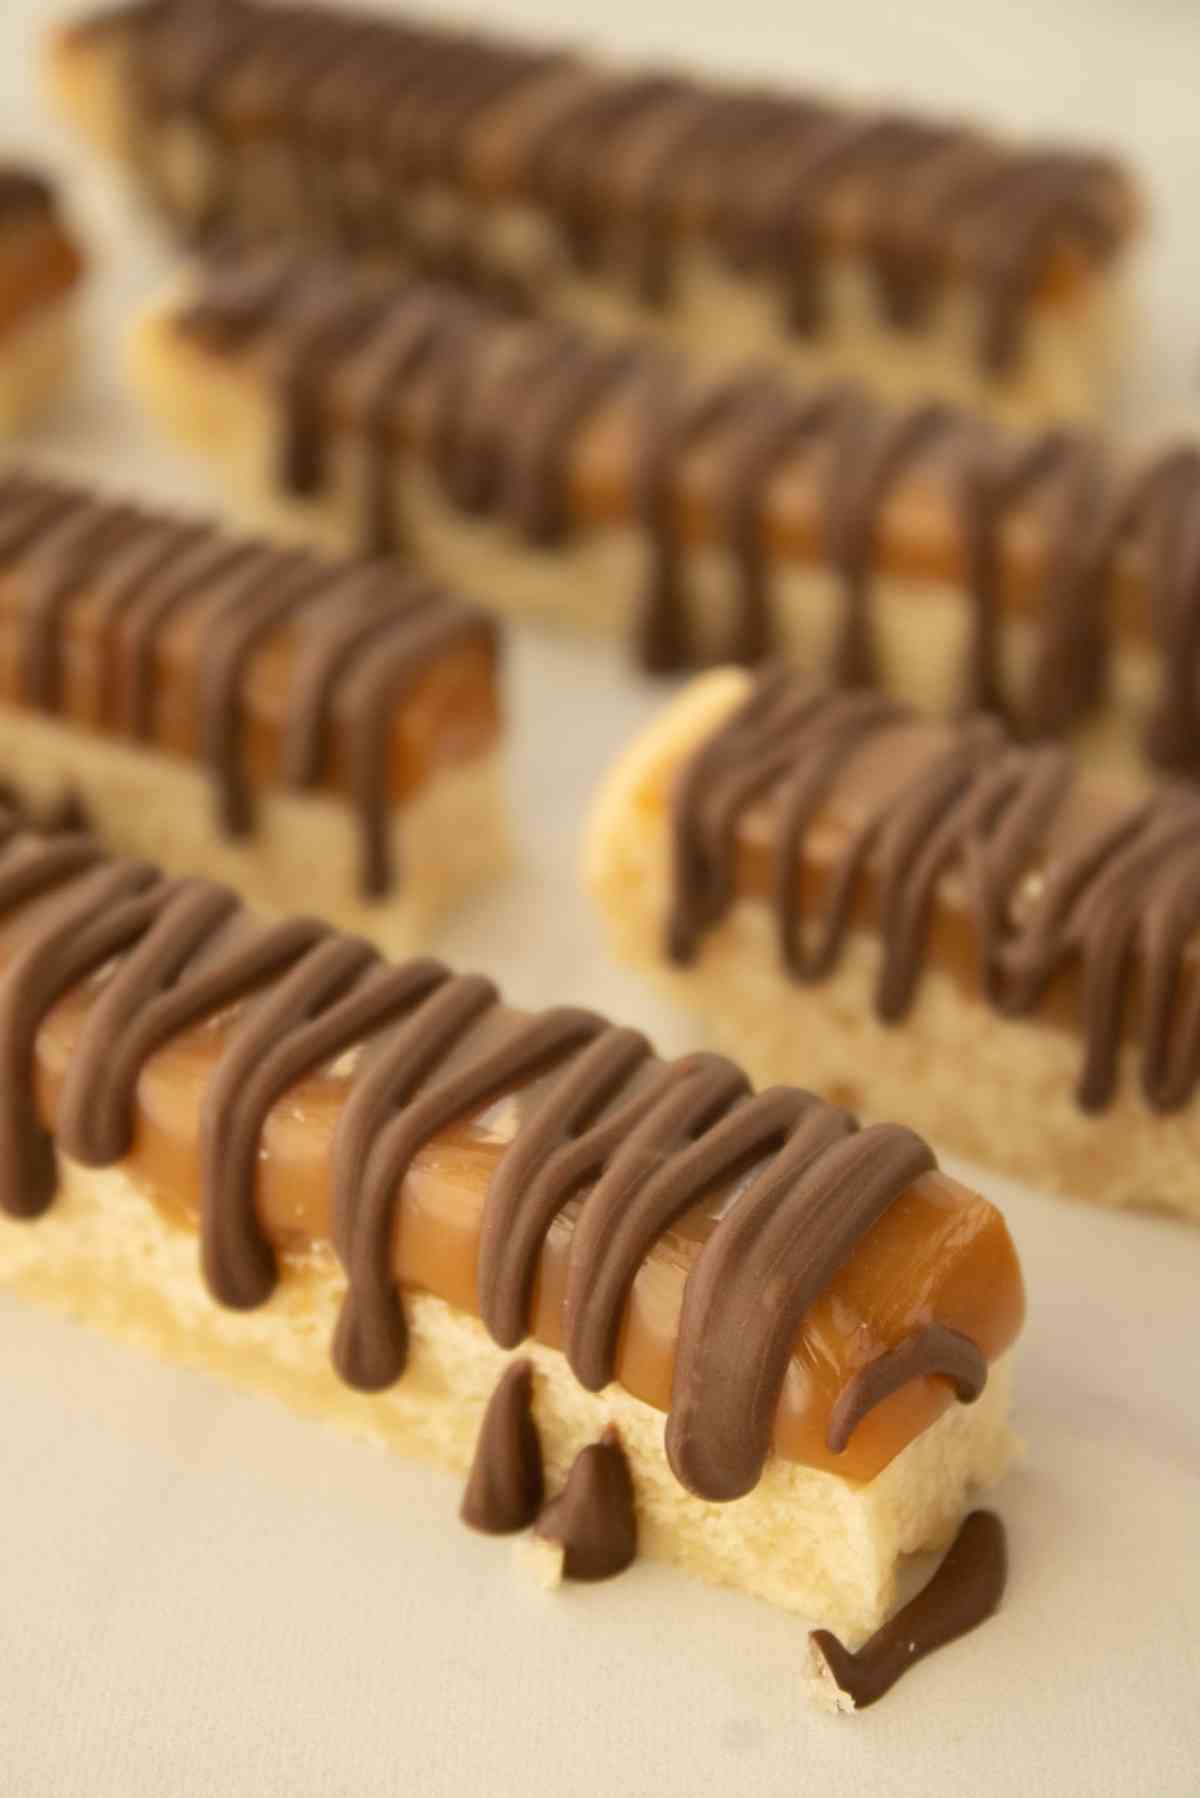 Twix cookie bars lined up and drizzled with chocolate.